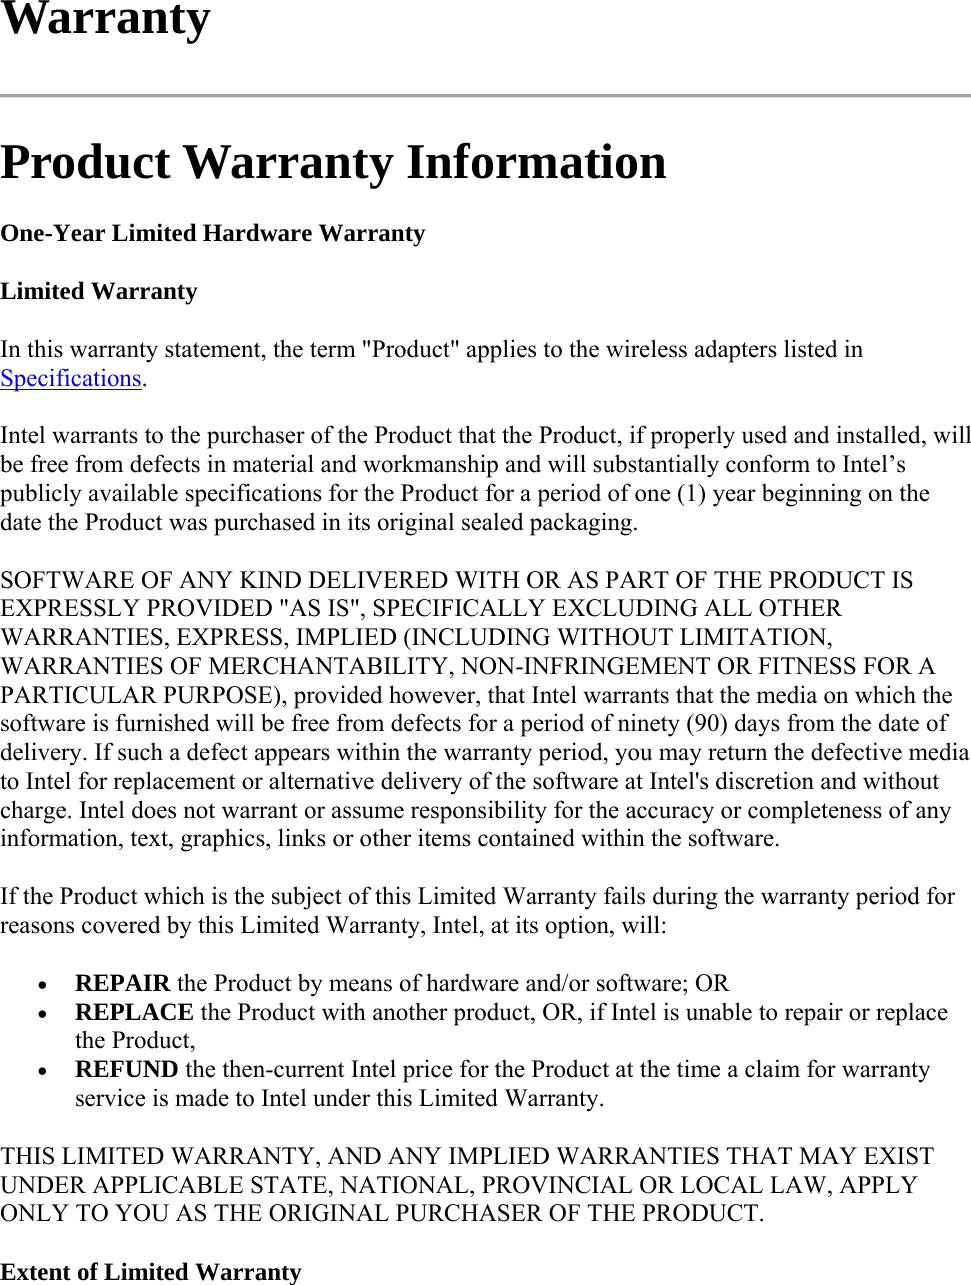 Warranty  Product Warranty Information One-Year Limited Hardware Warranty Limited Warranty In this warranty statement, the term &quot;Product&quot; applies to the wireless adapters listed in Specifications. Intel warrants to the purchaser of the Product that the Product, if properly used and installed, will be free from defects in material and workmanship and will substantially conform to Intel’s publicly available specifications for the Product for a period of one (1) year beginning on the date the Product was purchased in its original sealed packaging. SOFTWARE OF ANY KIND DELIVERED WITH OR AS PART OF THE PRODUCT IS EXPRESSLY PROVIDED &quot;AS IS&quot;, SPECIFICALLY EXCLUDING ALL OTHER WARRANTIES, EXPRESS, IMPLIED (INCLUDING WITHOUT LIMITATION, WARRANTIES OF MERCHANTABILITY, NON-INFRINGEMENT OR FITNESS FOR A PARTICULAR PURPOSE), provided however, that Intel warrants that the media on which the software is furnished will be free from defects for a period of ninety (90) days from the date of delivery. If such a defect appears within the warranty period, you may return the defective media to Intel for replacement or alternative delivery of the software at Intel&apos;s discretion and without charge. Intel does not warrant or assume responsibility for the accuracy or completeness of any information, text, graphics, links or other items contained within the software. If the Product which is the subject of this Limited Warranty fails during the warranty period for reasons covered by this Limited Warranty, Intel, at its option, will:  REPAIR the Product by means of hardware and/or software; OR  REPLACE the Product with another product, OR, if Intel is unable to repair or replace the Product,  REFUND the then-current Intel price for the Product at the time a claim for warranty service is made to Intel under this Limited Warranty. THIS LIMITED WARRANTY, AND ANY IMPLIED WARRANTIES THAT MAY EXIST UNDER APPLICABLE STATE, NATIONAL, PROVINCIAL OR LOCAL LAW, APPLY ONLY TO YOU AS THE ORIGINAL PURCHASER OF THE PRODUCT. Extent of Limited Warranty 